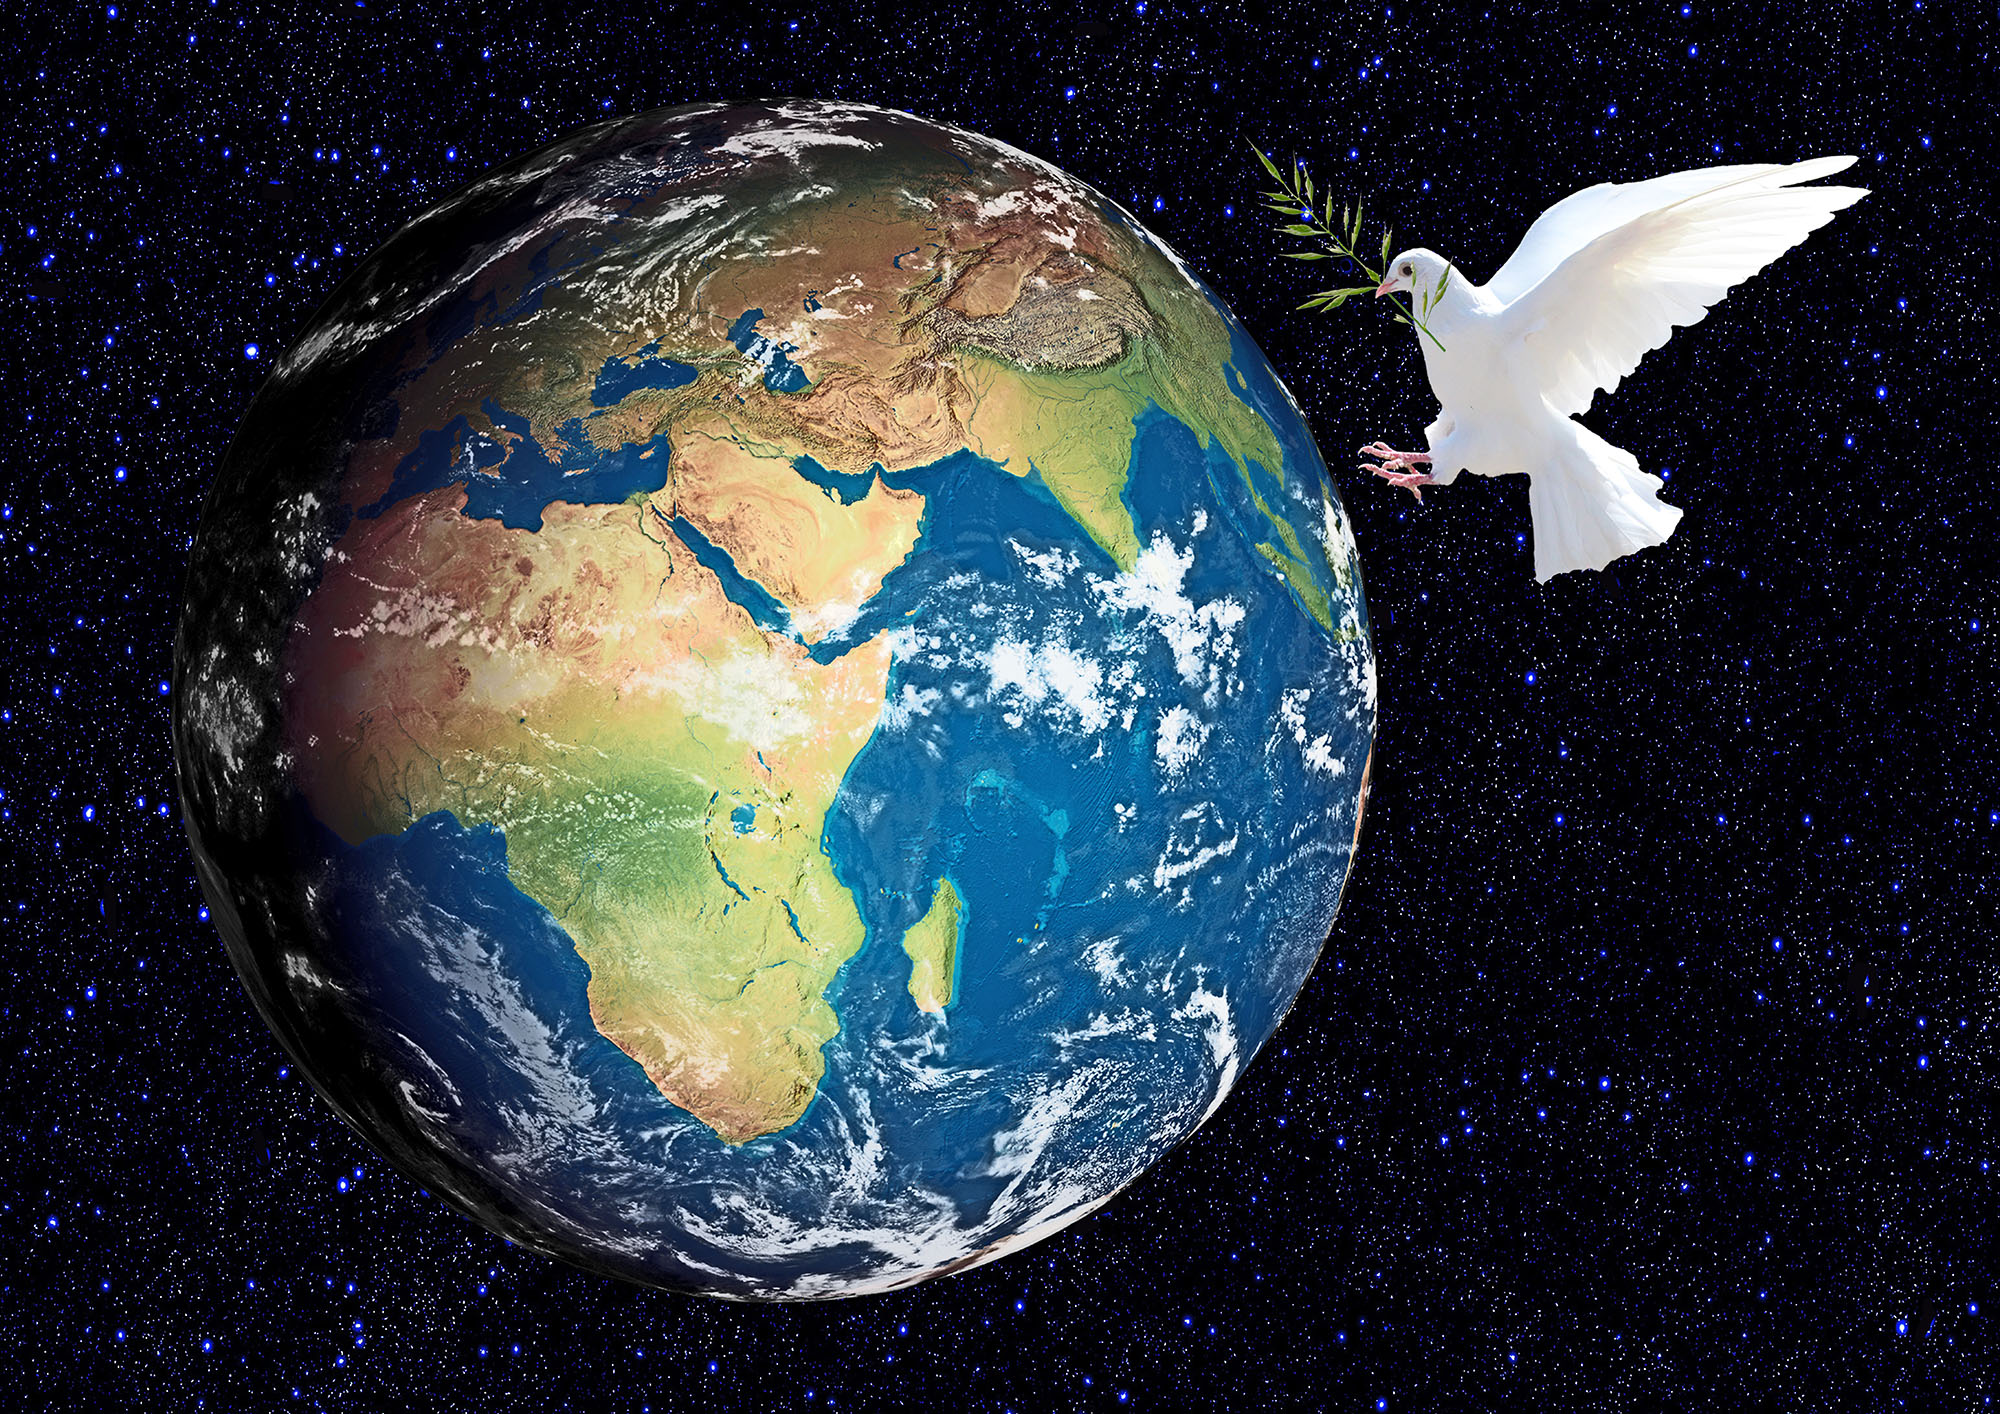 image of planet earth ion space with dove of peace about to land on it